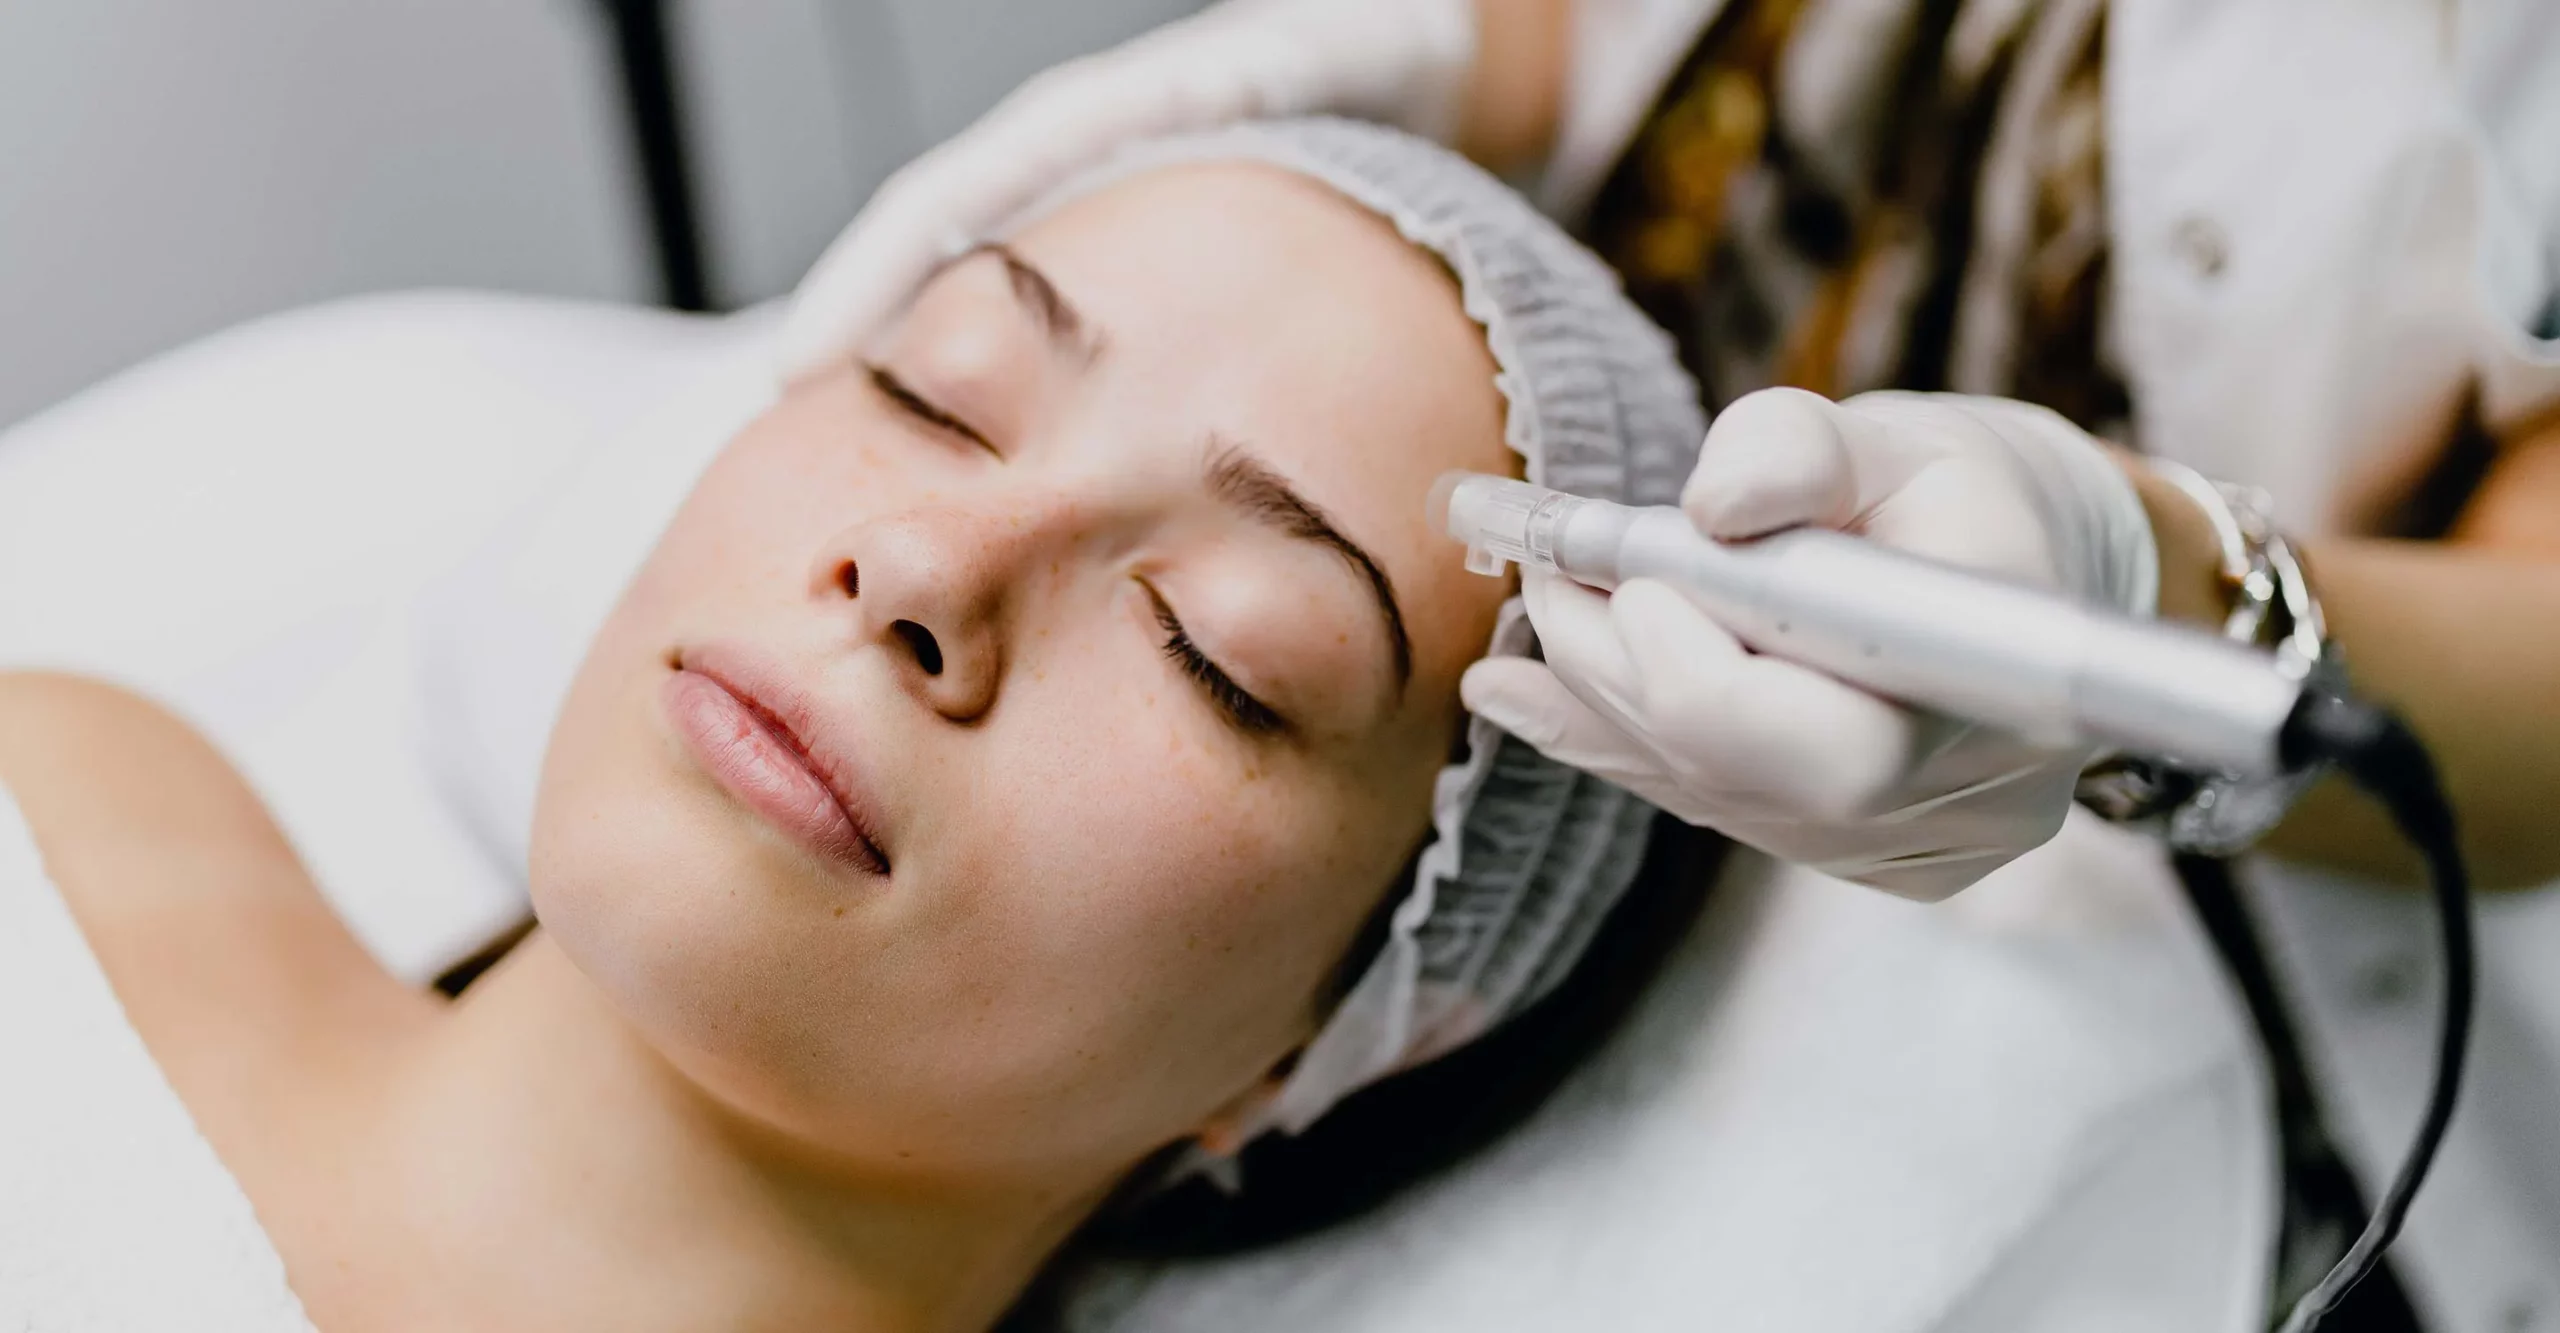 Image shows woman having microneedling treatment performend on face.